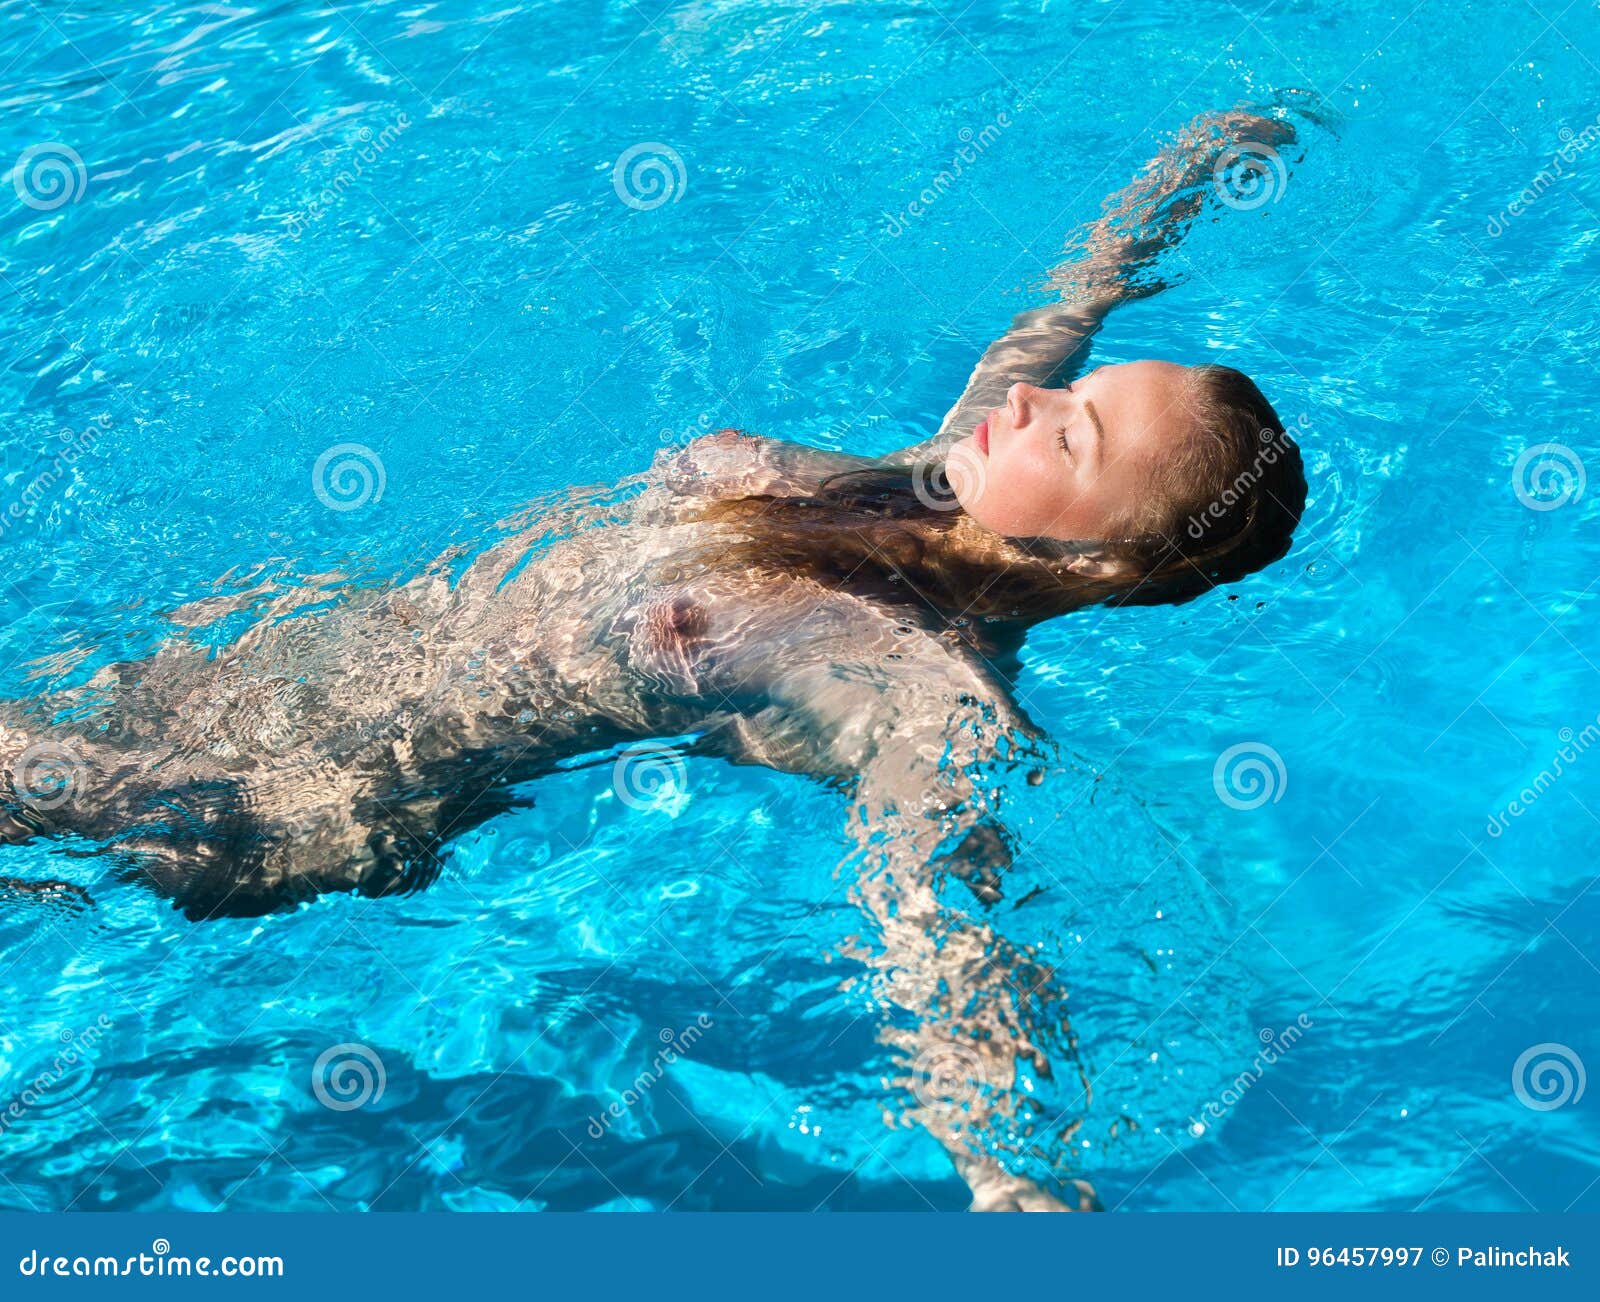 Naked Women Swimming In A Pool